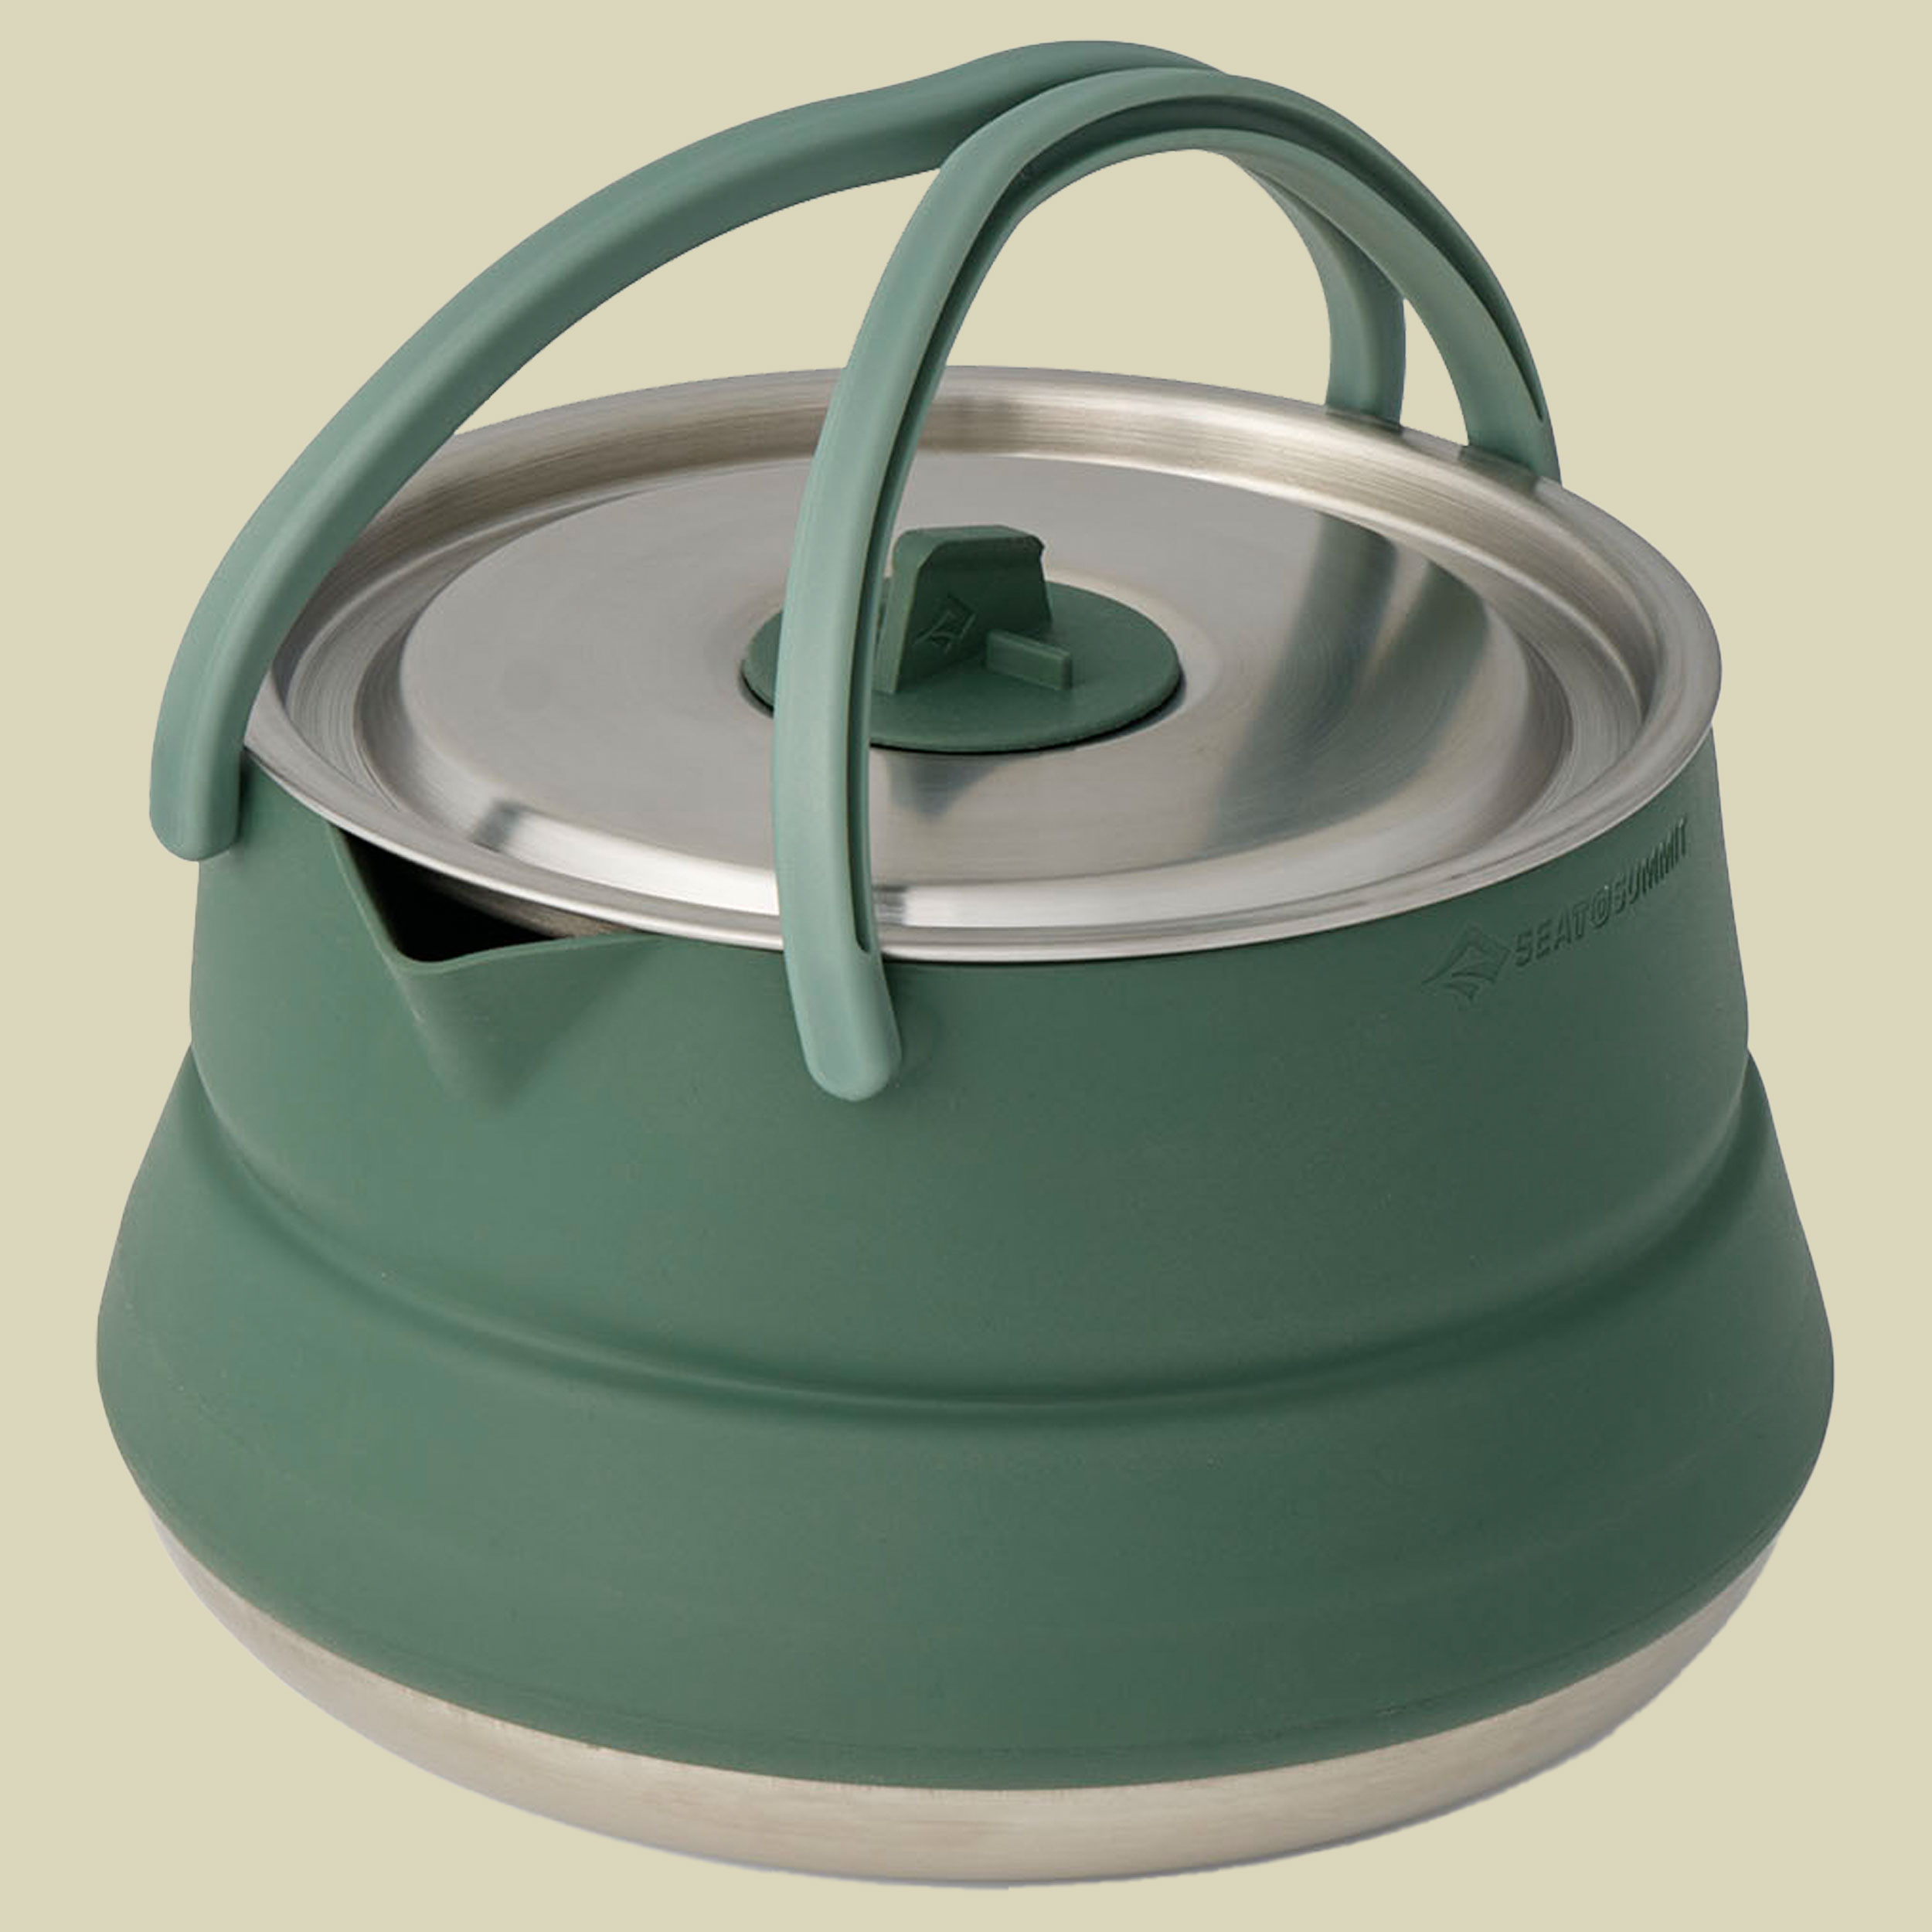 Detour Stainless Steel Collapsible Kettle